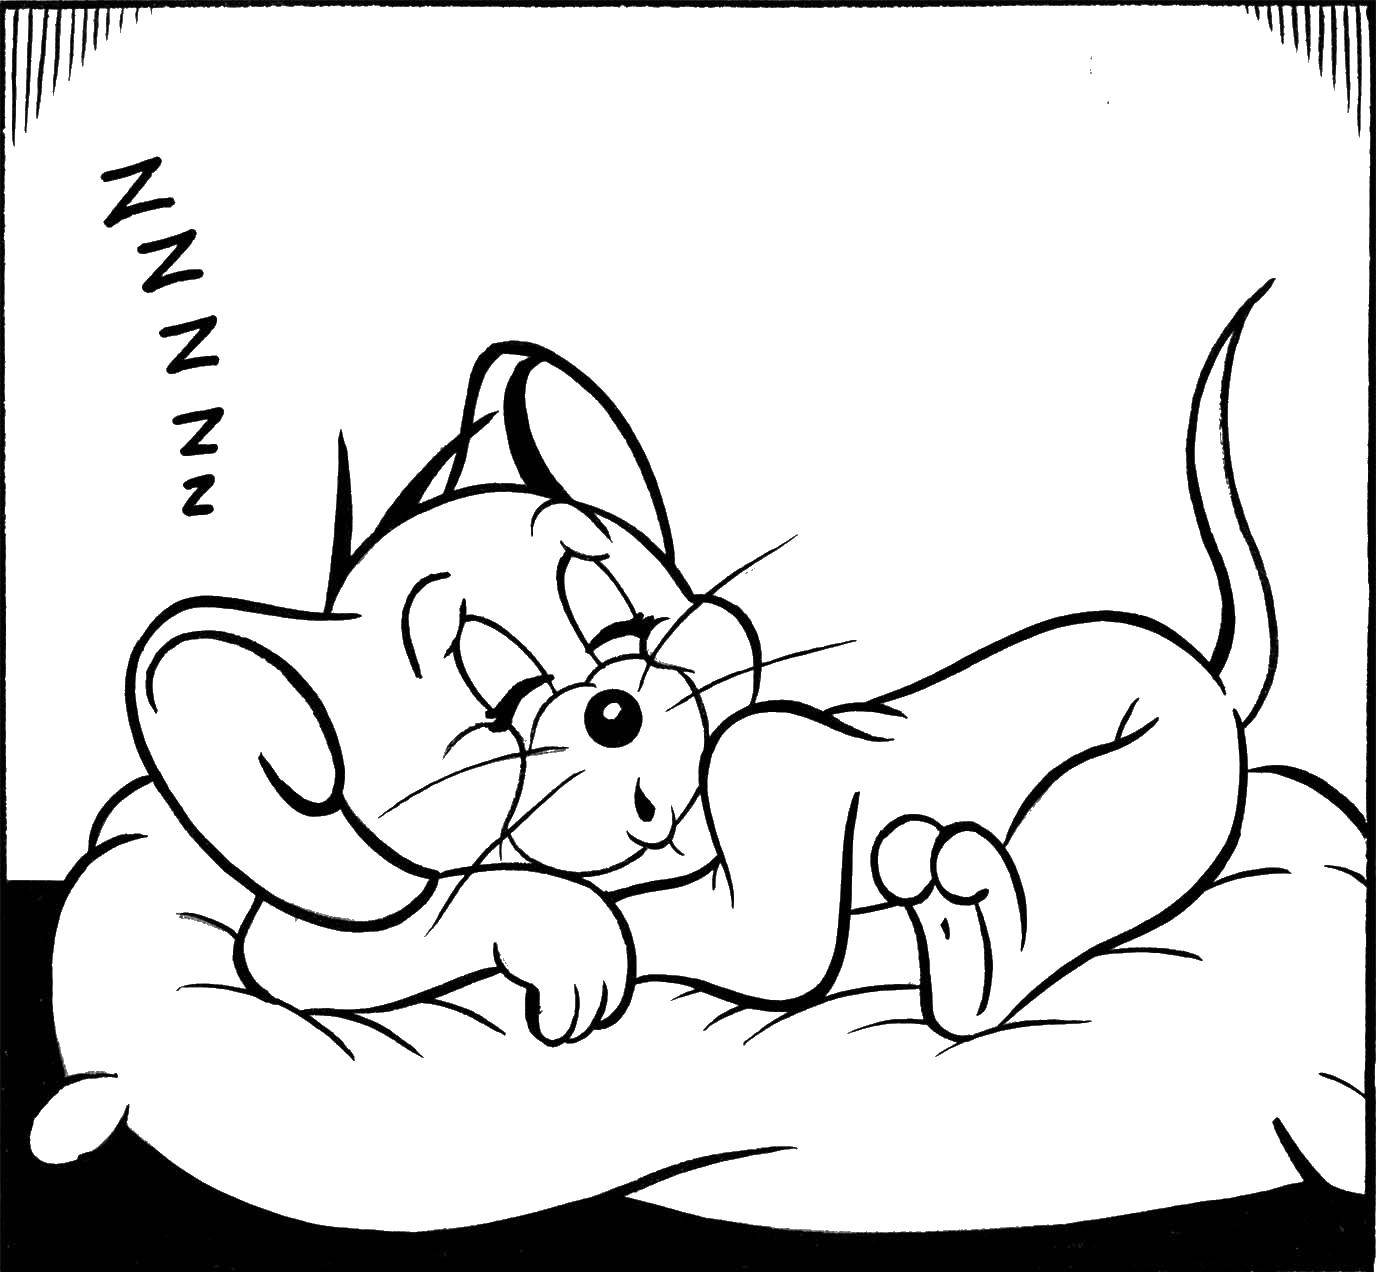 Coloring Jerry is sleeping. Category Cartoon character. Tags:  Character cartoon, Tom and Jerry.